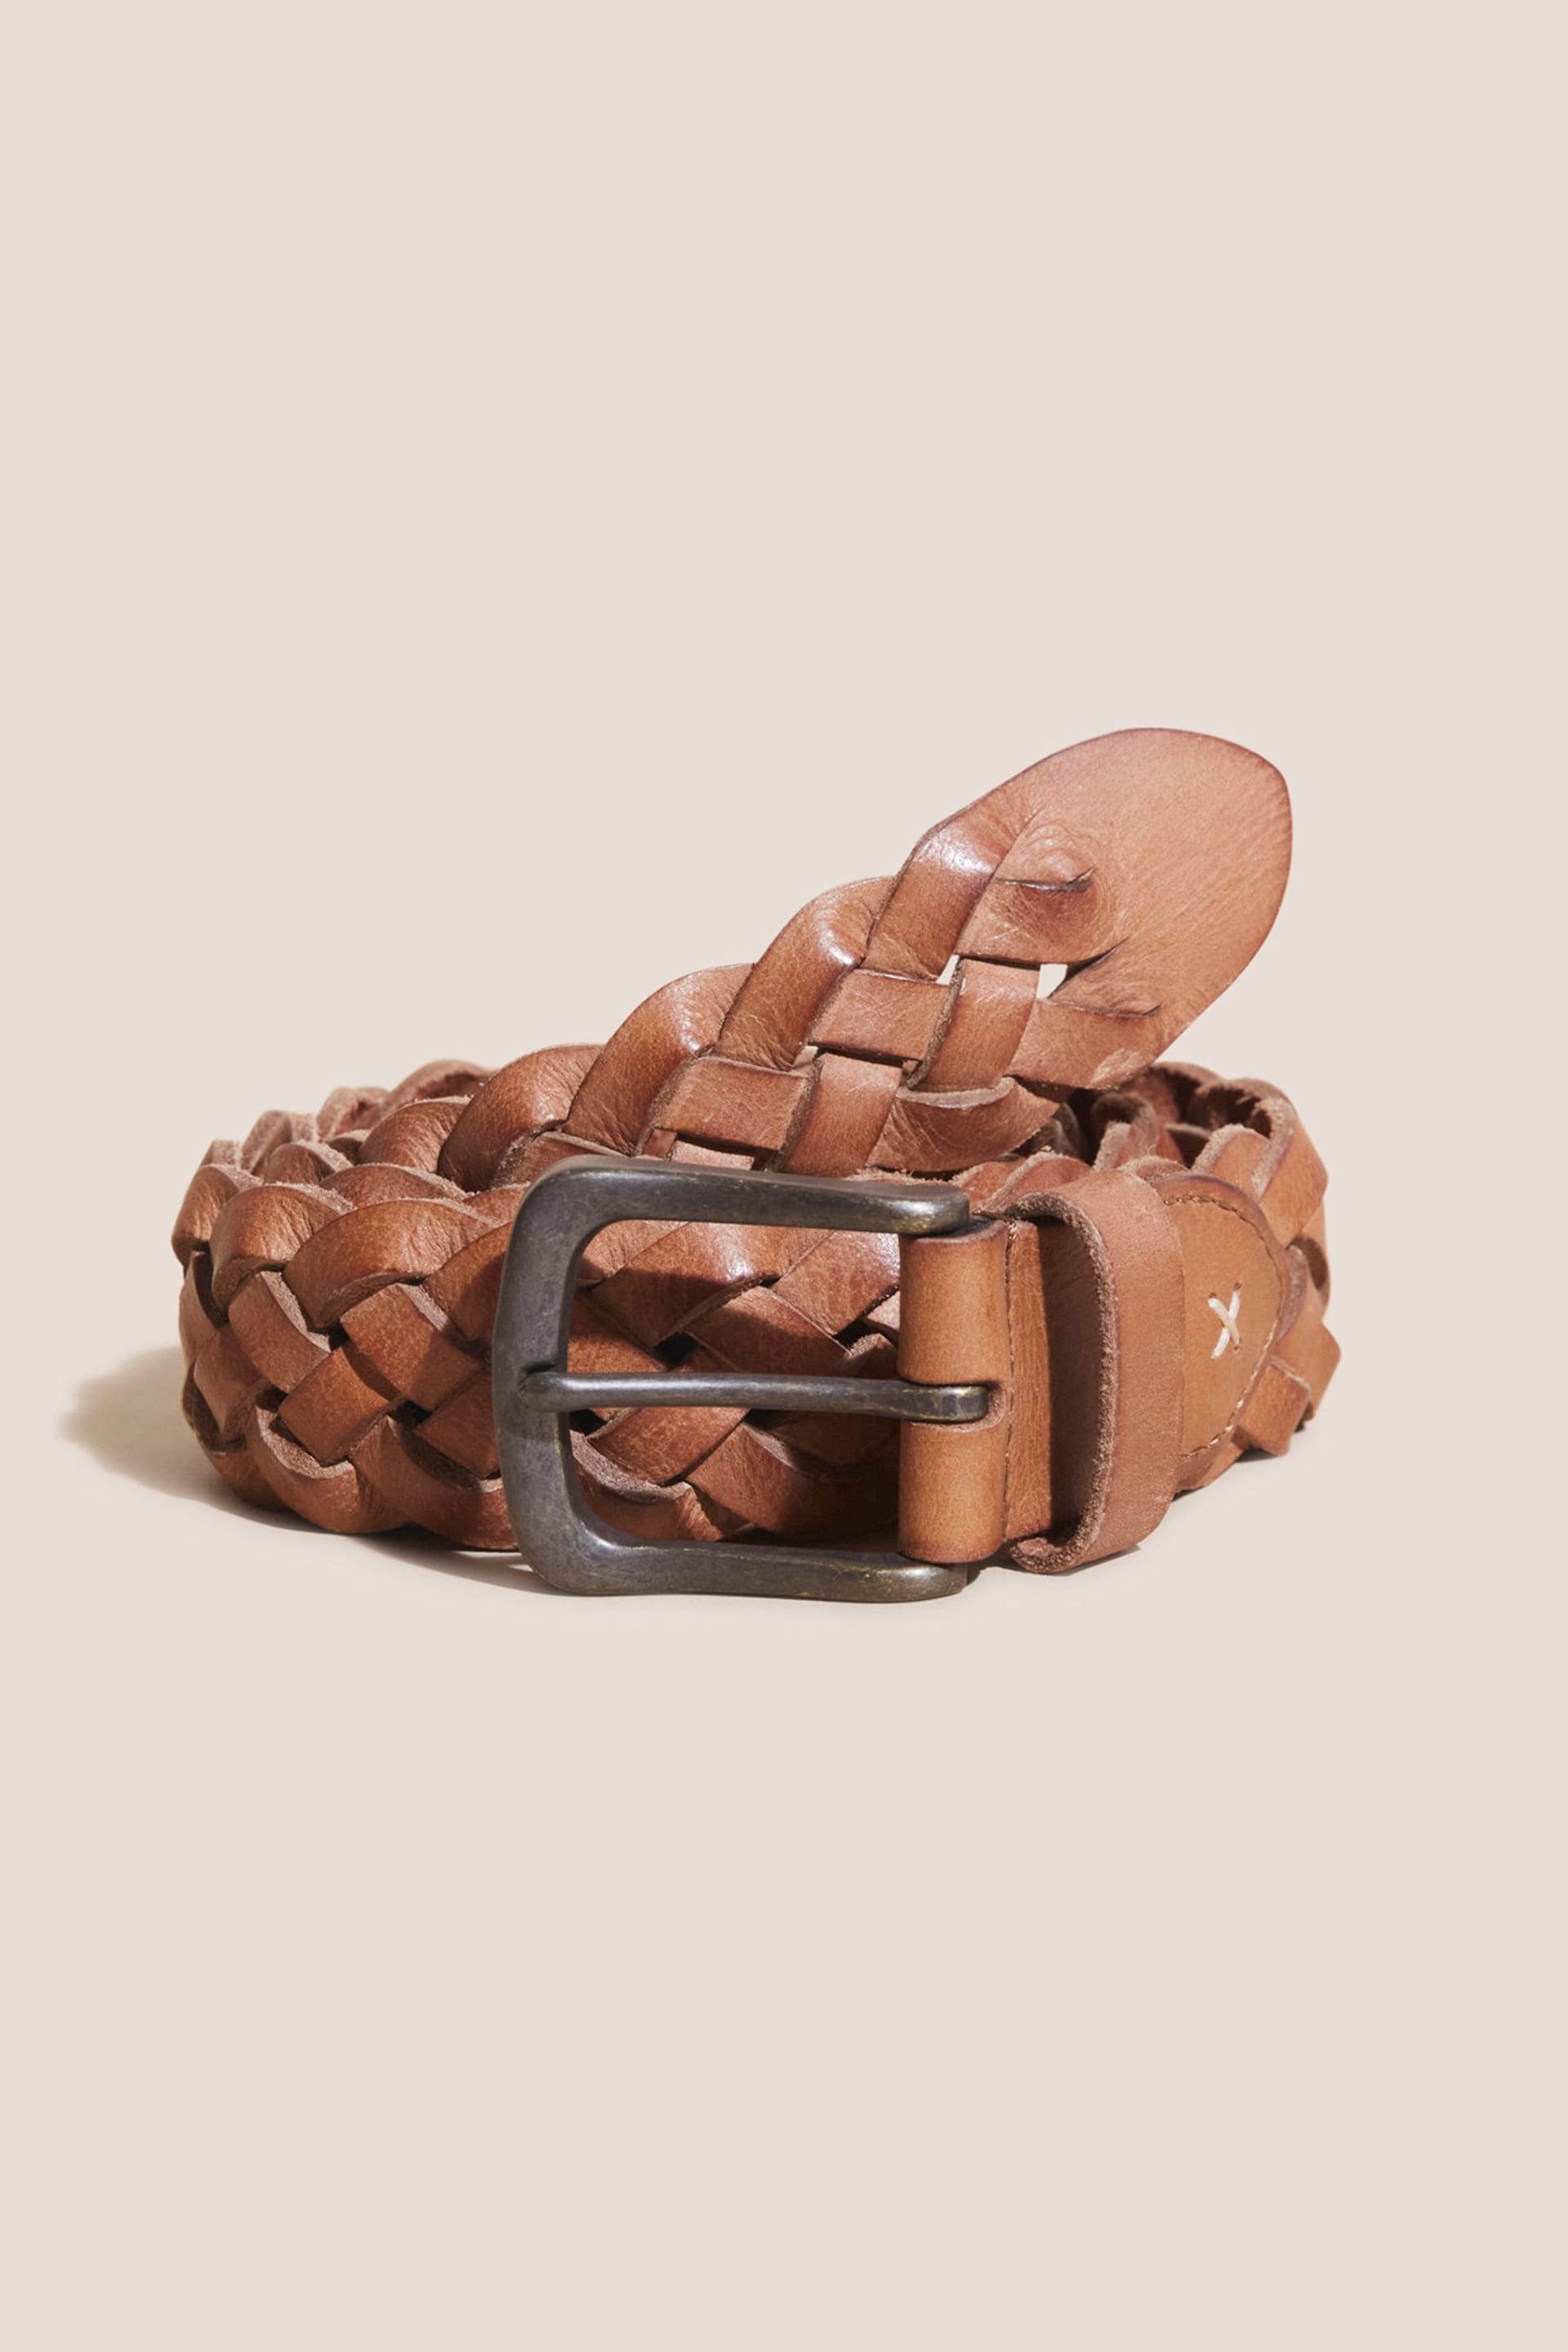 White Stuff Brown Weave Leather Belt - Image 1 of 2